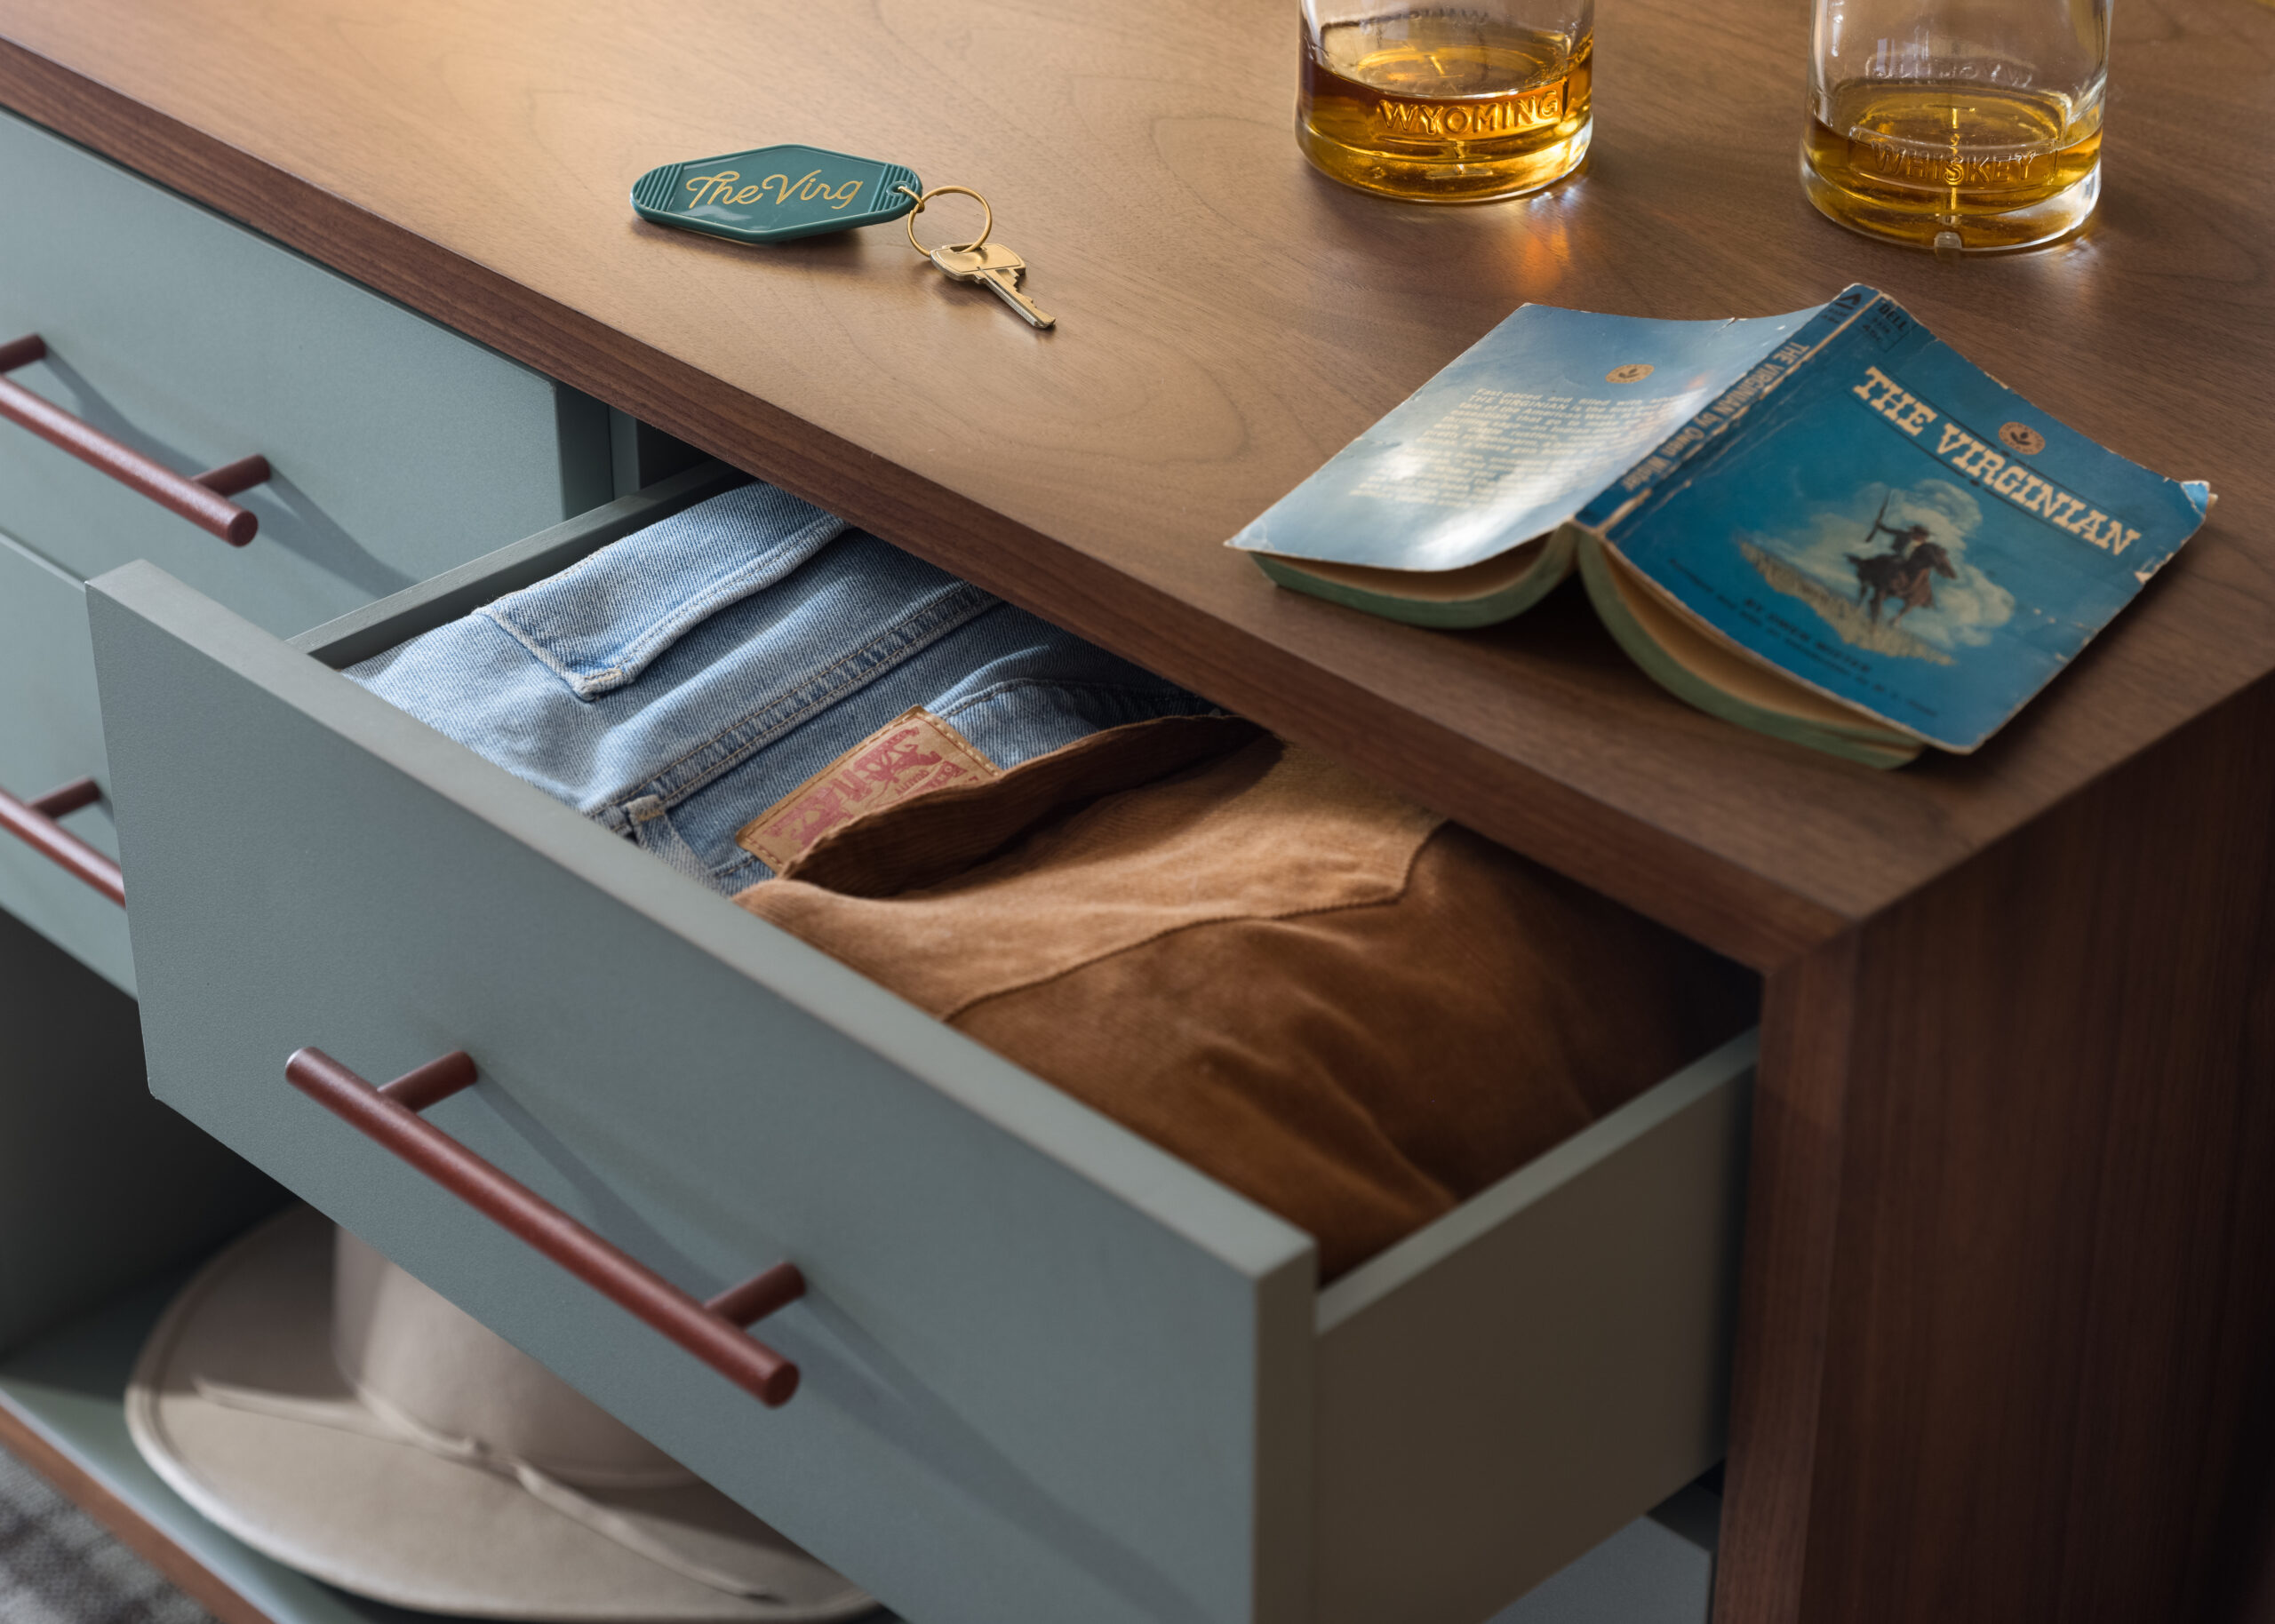 Drawer neatly stores clothes, while a table holds a key, notebook, and two glasses.